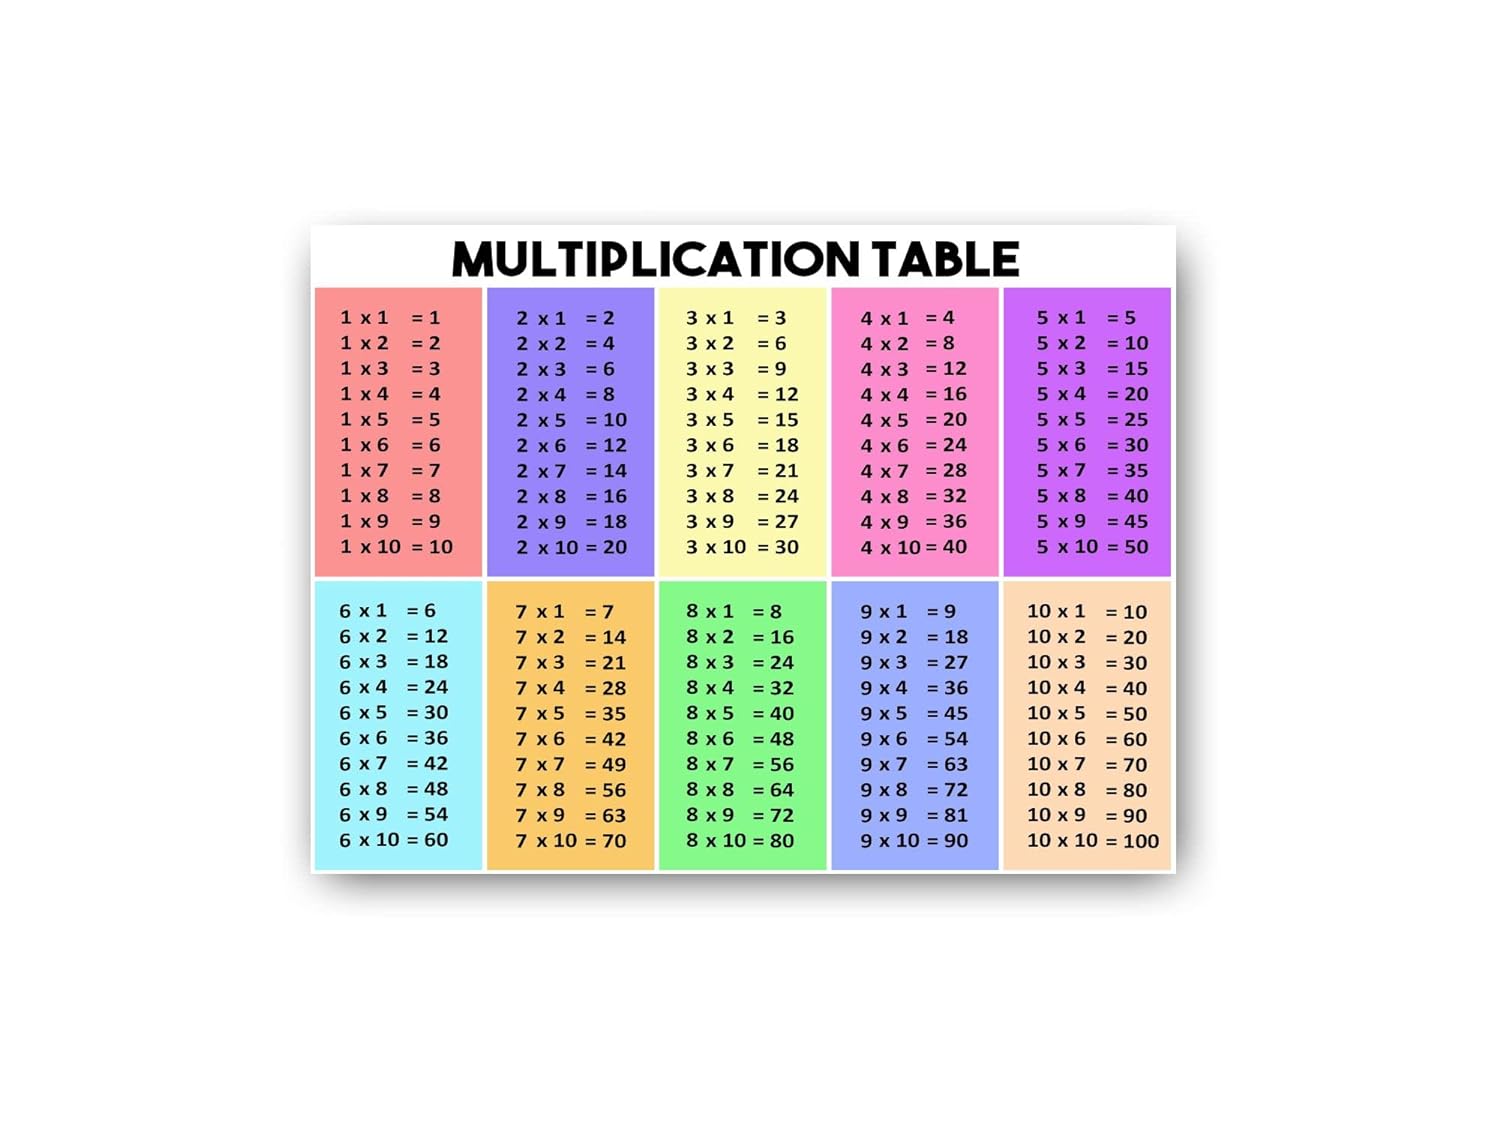 Multiplication table, a helpful tool for learning activities for 4-year-olds